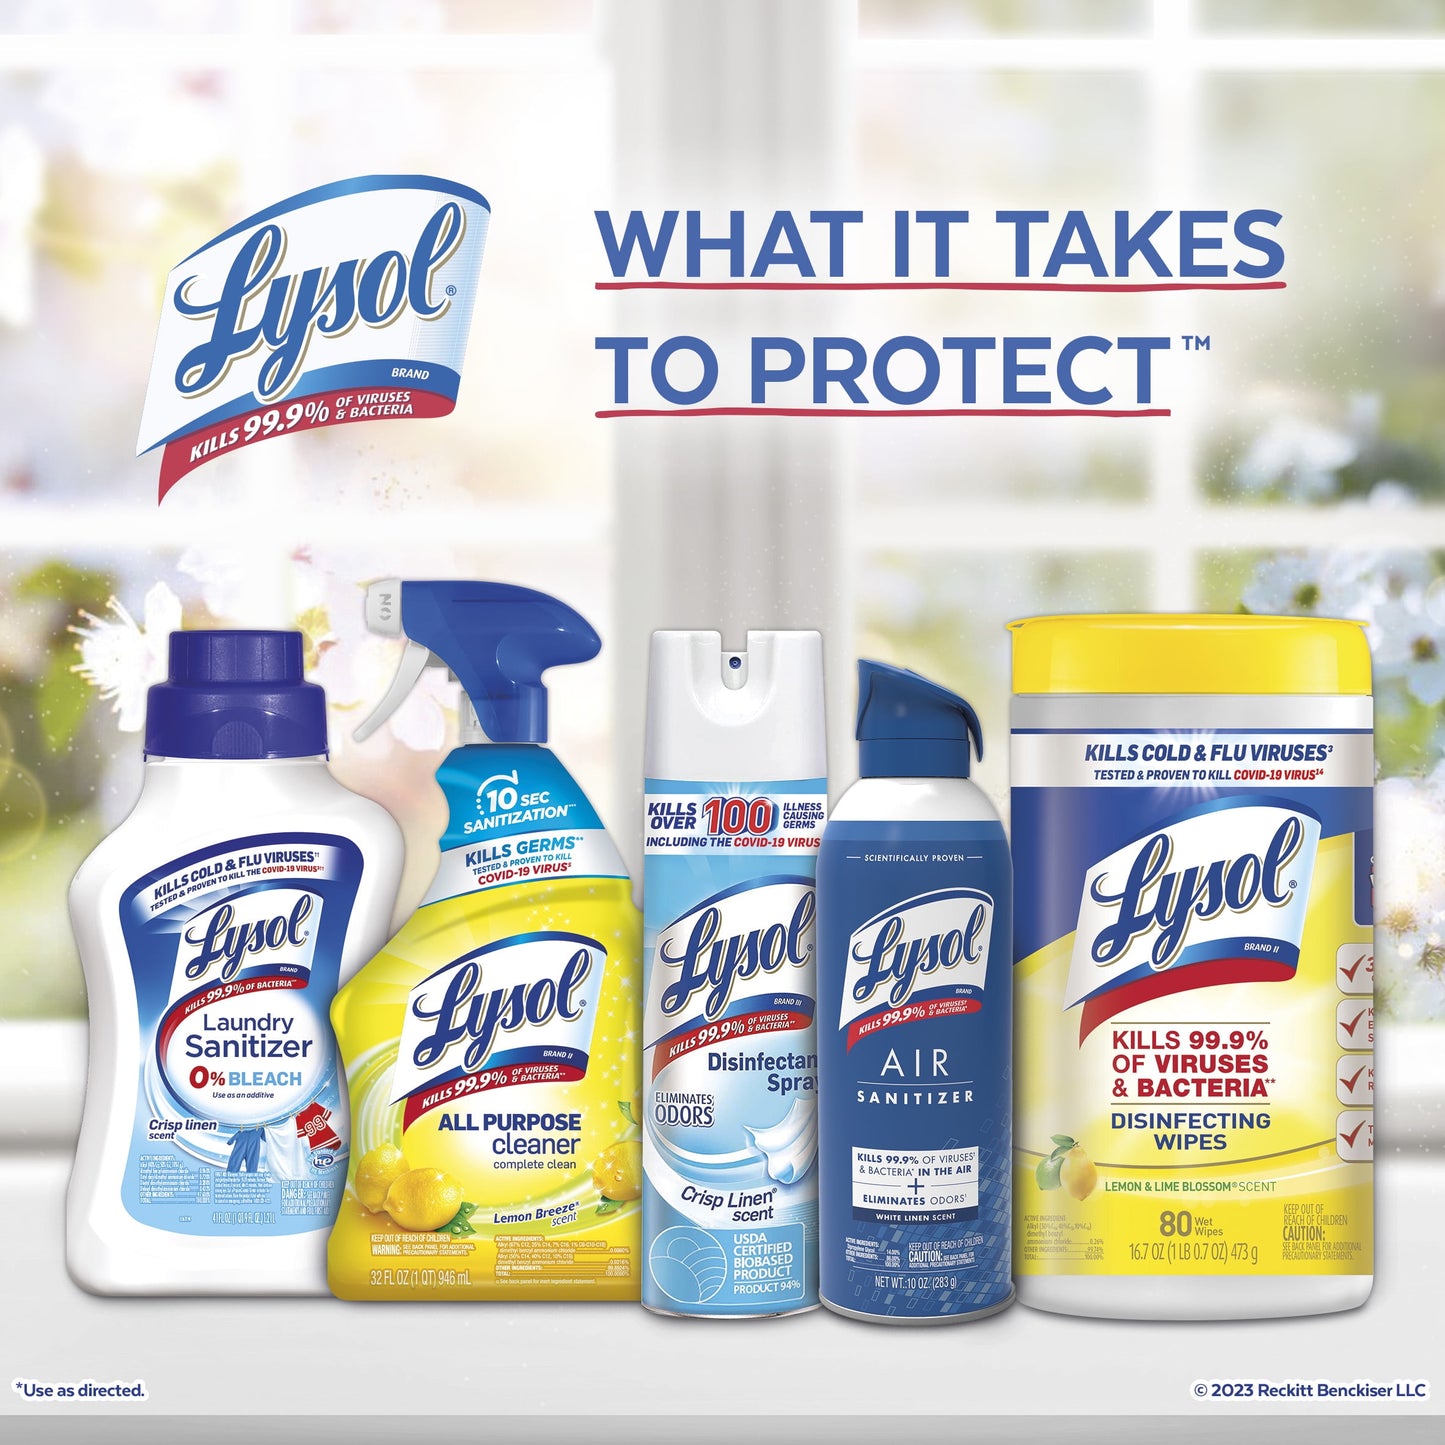 Lysol Multi-Surface Cleaner, Sanitizing and Disinfecting Pour, to Clean and Deodorize, Sparkling Lemon and Sunflower Essence, 90 Fl Oz.